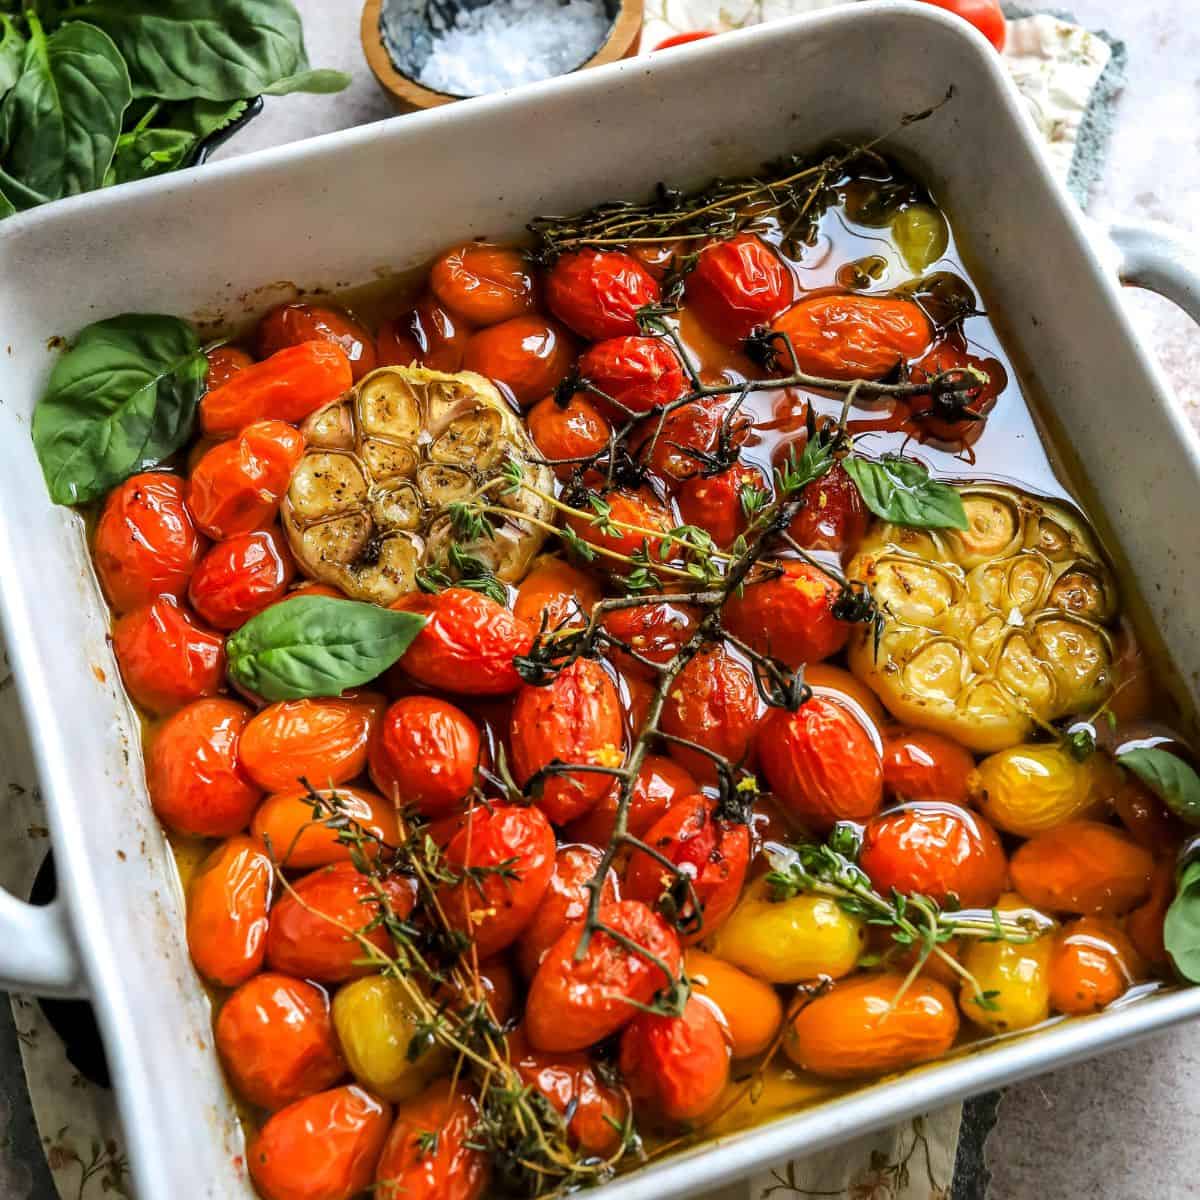 An image of tomato confit in a baking dish.